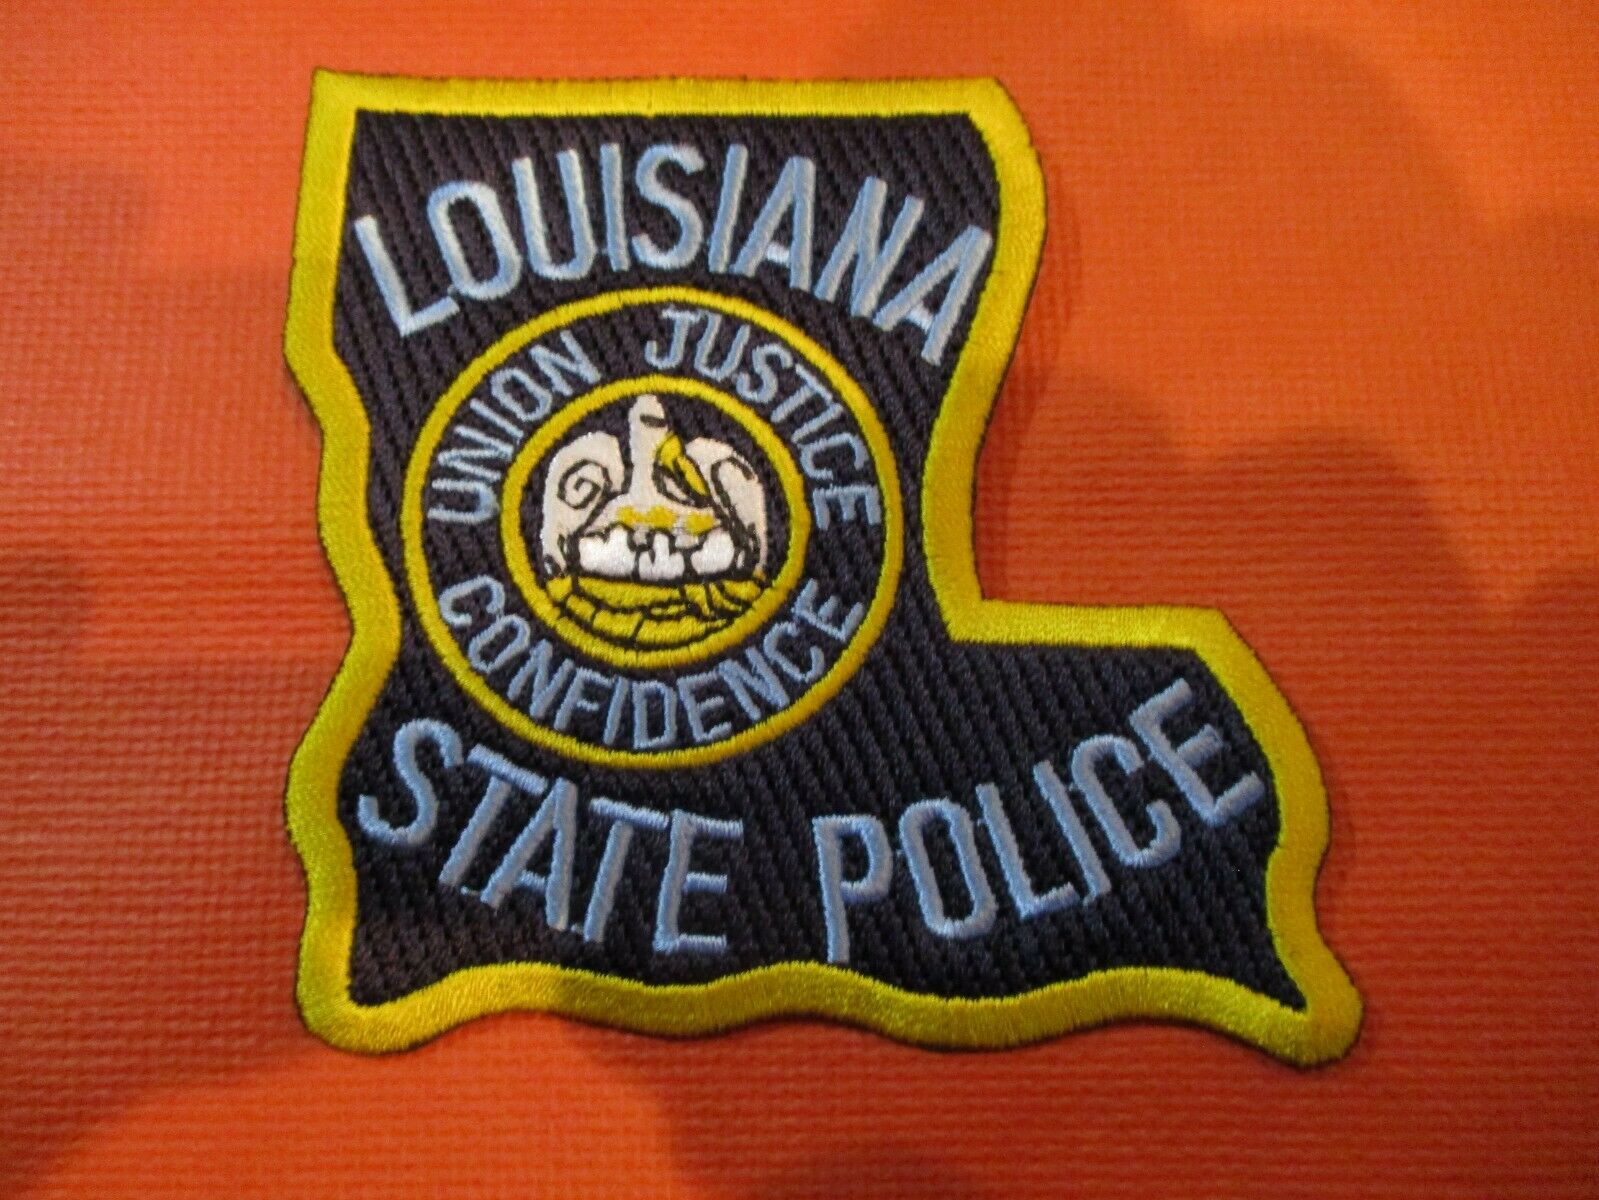 Collectible Louisiana Police Patch,Louisiana State Police,New